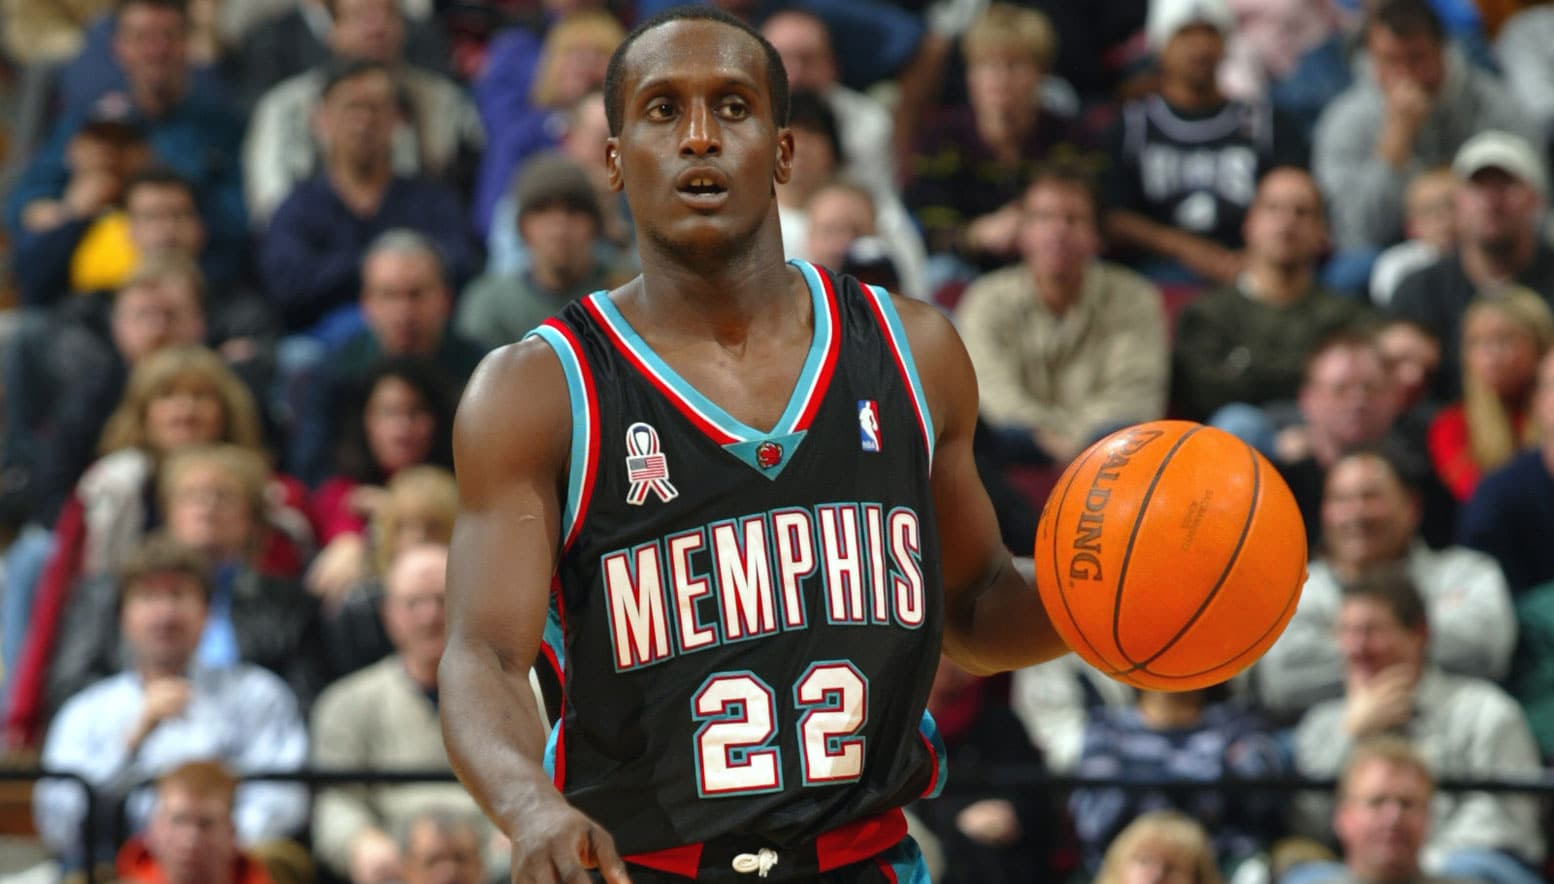 Brevin Knight starts off at 10th greatest short basketball players of ll time